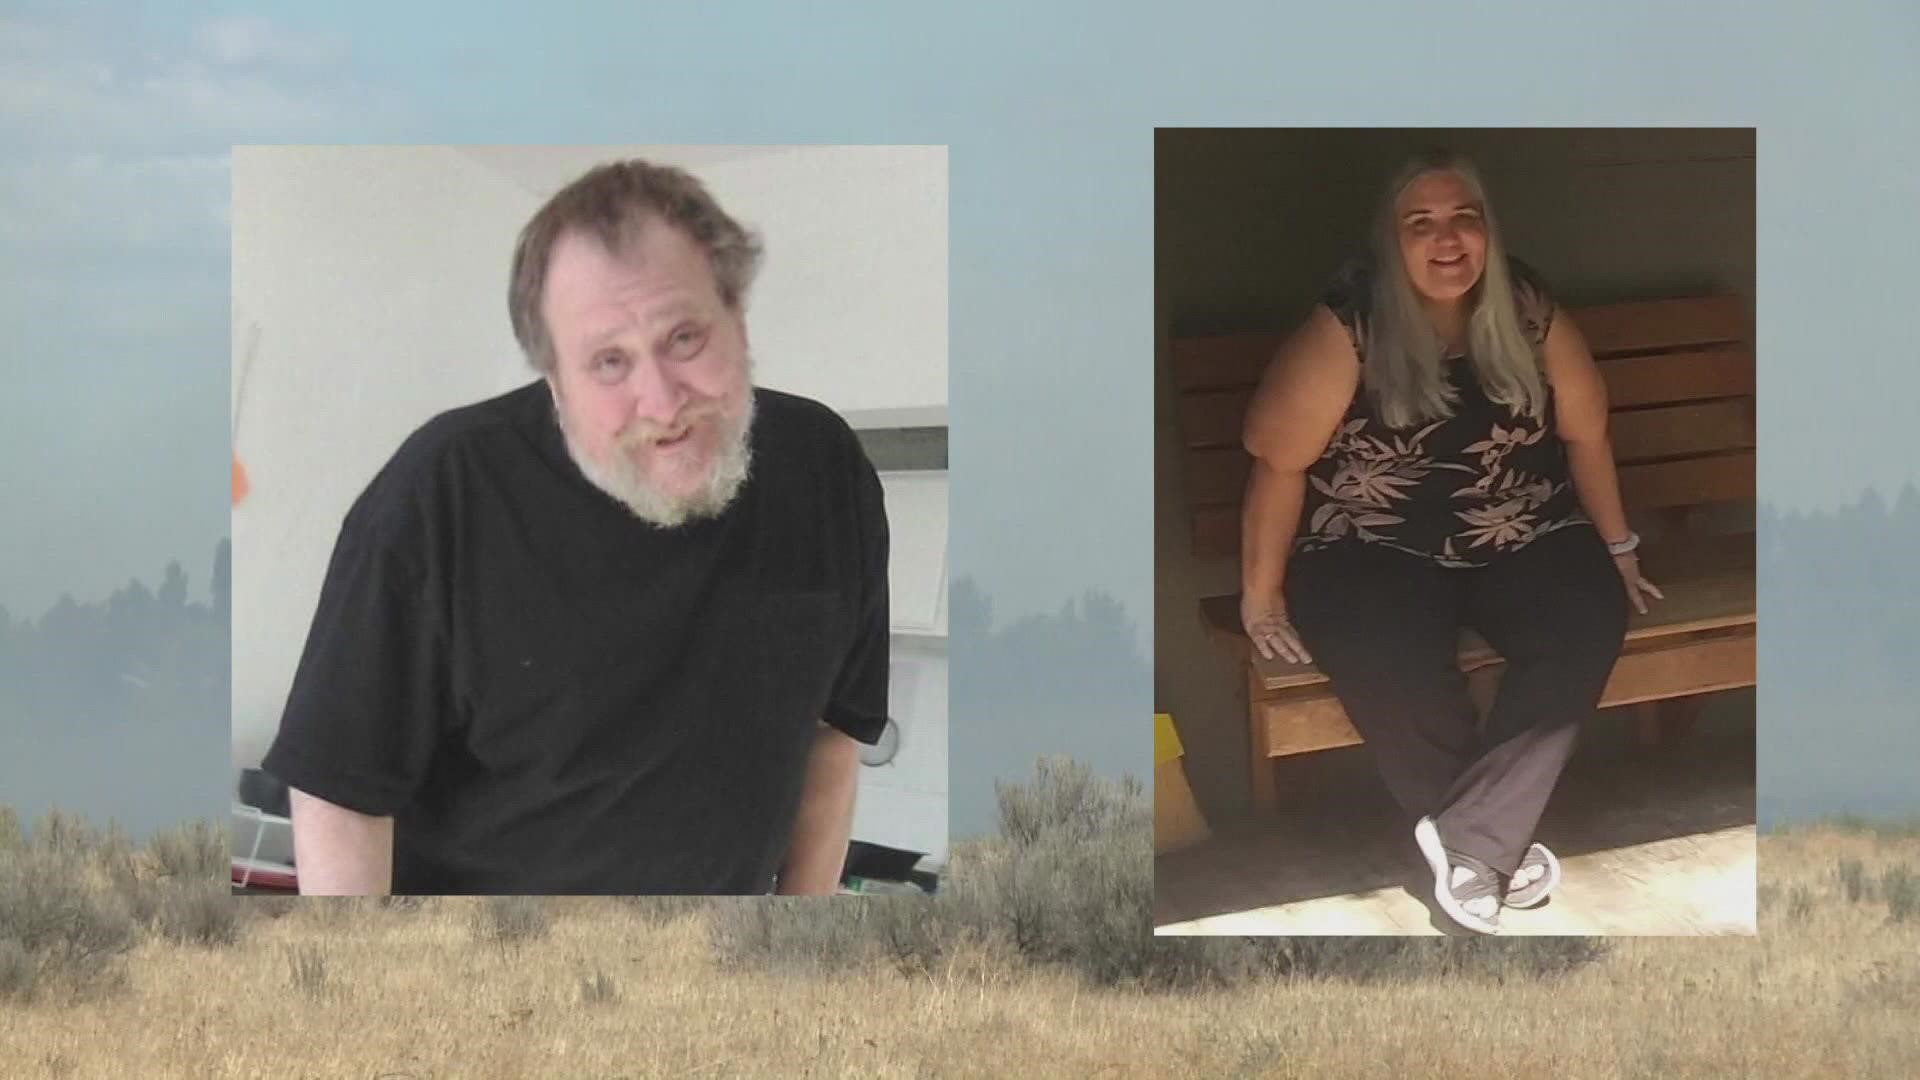 The body believed to be Theresa Bergman was found in rural Lincoln County. Her husband, Charles Bergman, is still unaccounted for and wanted for first-degree murder.